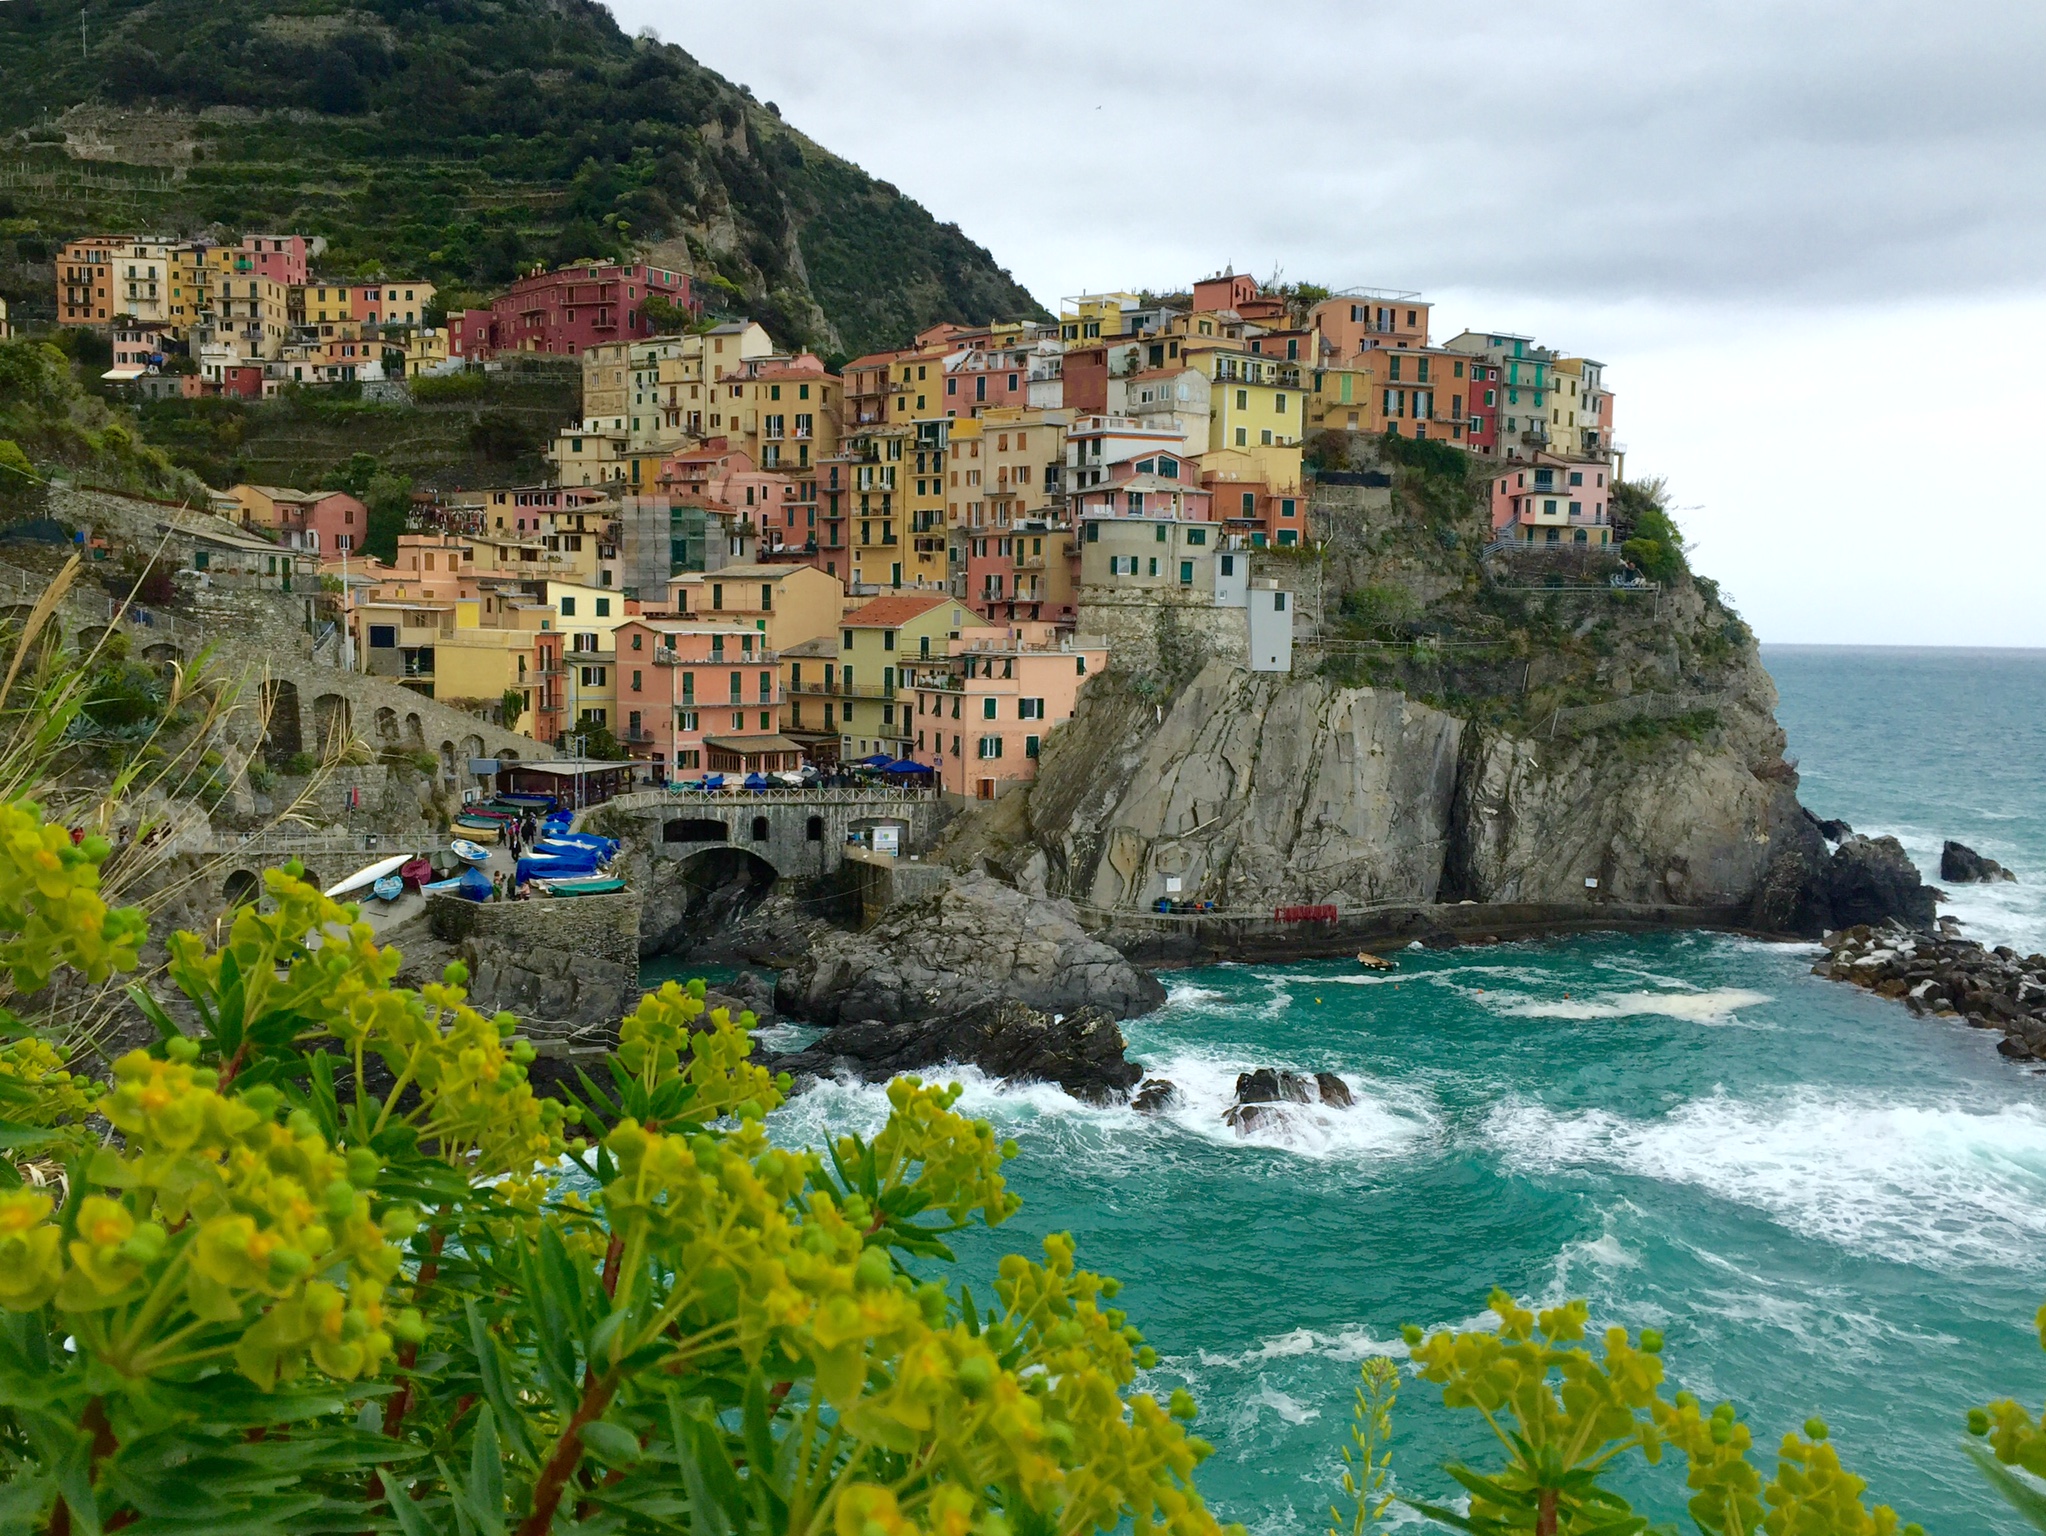 a colorful buildings on a cliff by the water with Cinque Terre in the background